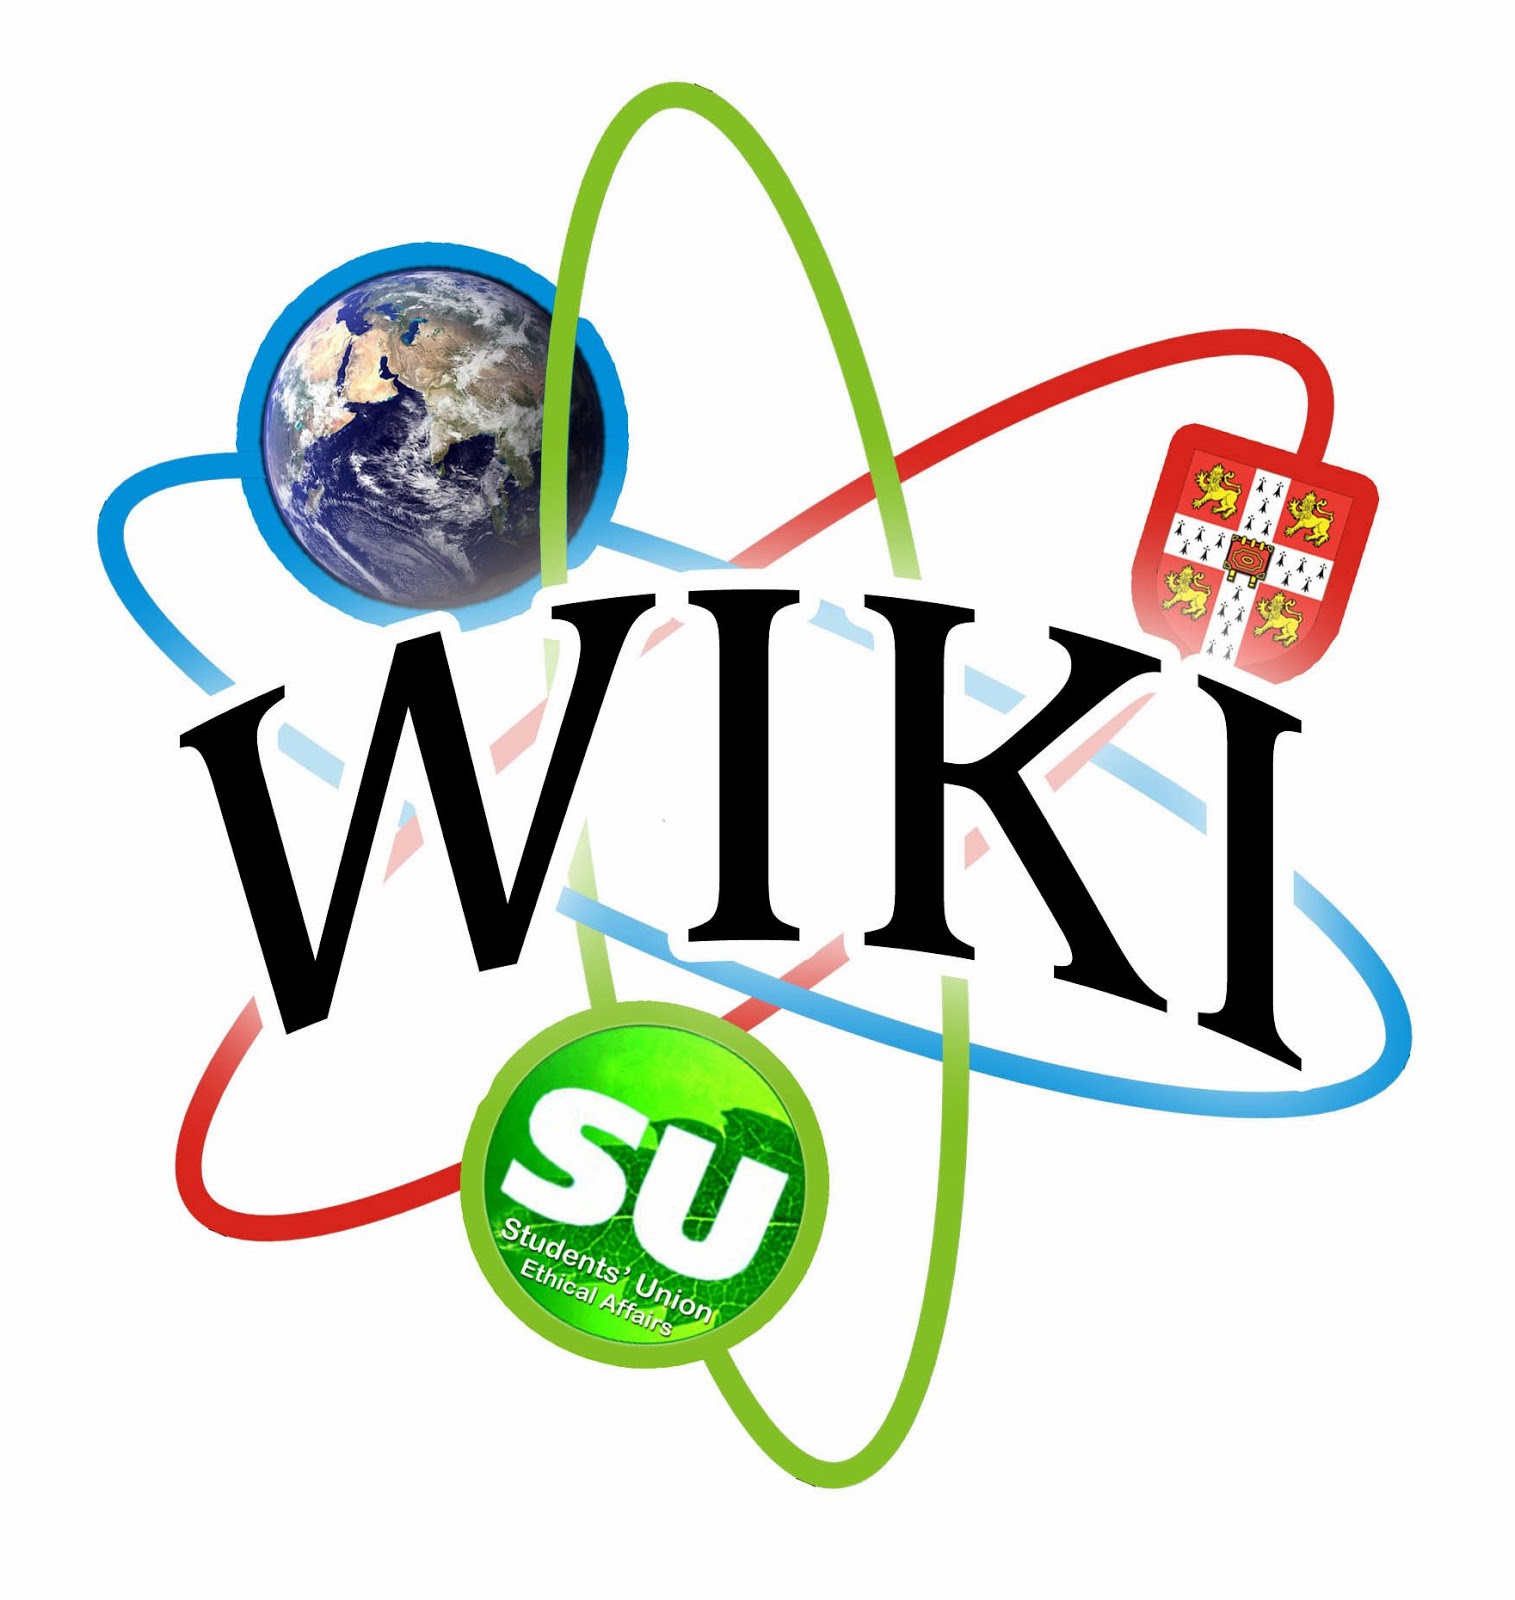 WIKIS